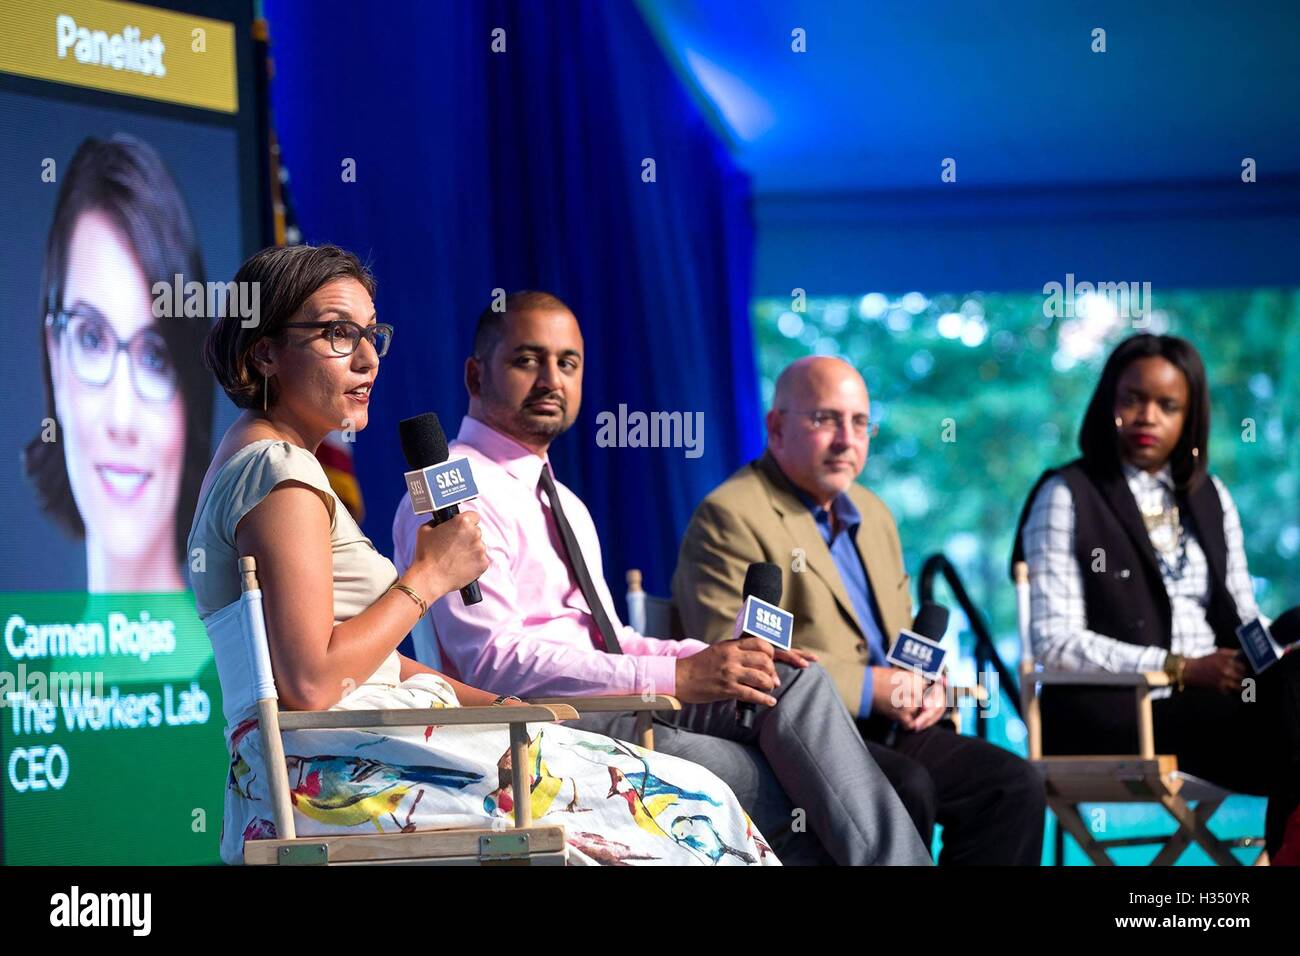 Washington DC, USA. 3rd October, 2016. Carmen Rojas, Anil Dash, Evan Wolfson and Britttany Packnett participate in a panel discussion 'How We Make Change' during the South by South Lawn festival on the South Lawn of the White House October 3, 2016 in Washington, DC. The event is inspired by the South by Southwest festival and includes arts, film, entertainment and technology. Credit:  Planetpix/Alamy Live News Stock Photo